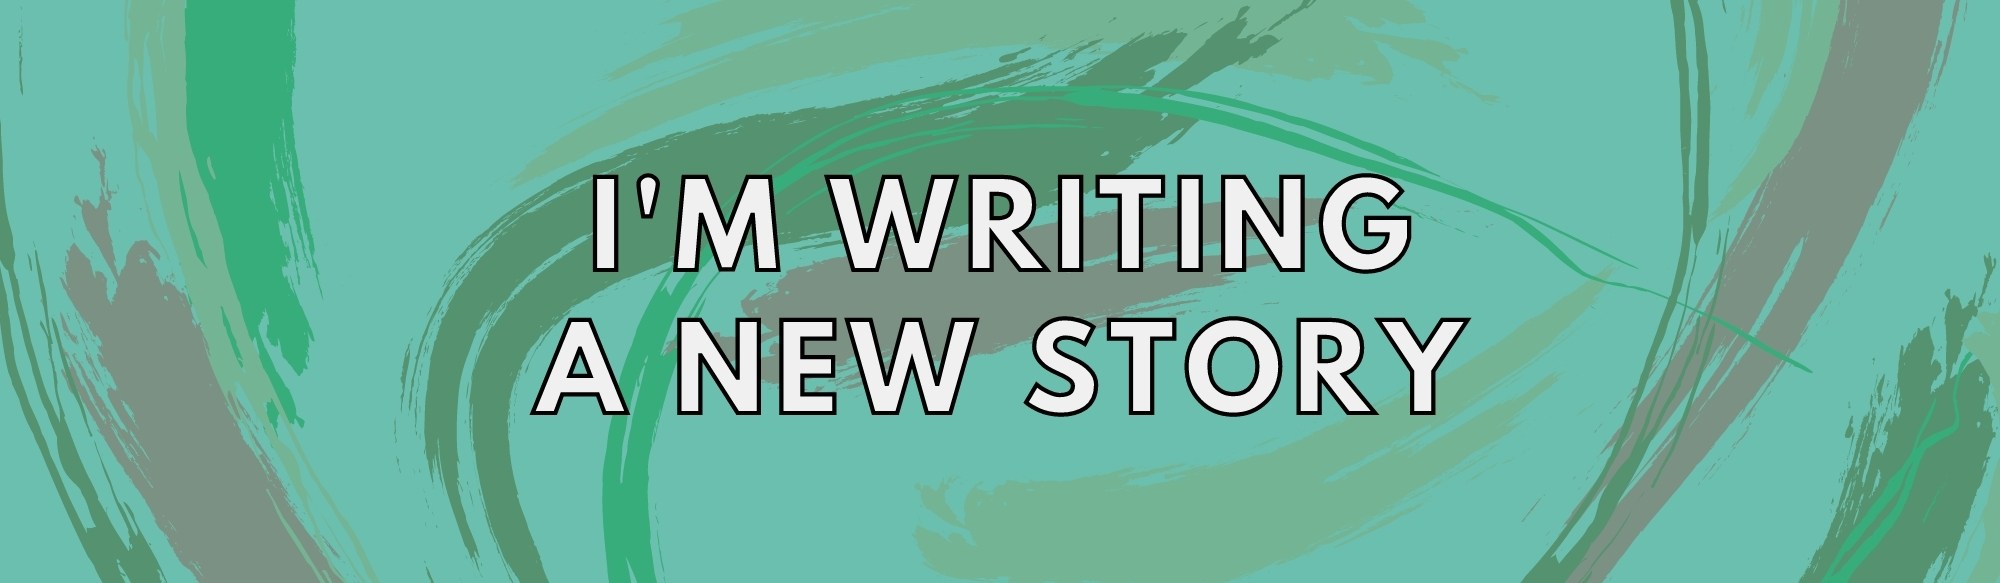 Graphic with the text "I'm writing a new story" on top of a green background with dark and light green and brown paint strokes.